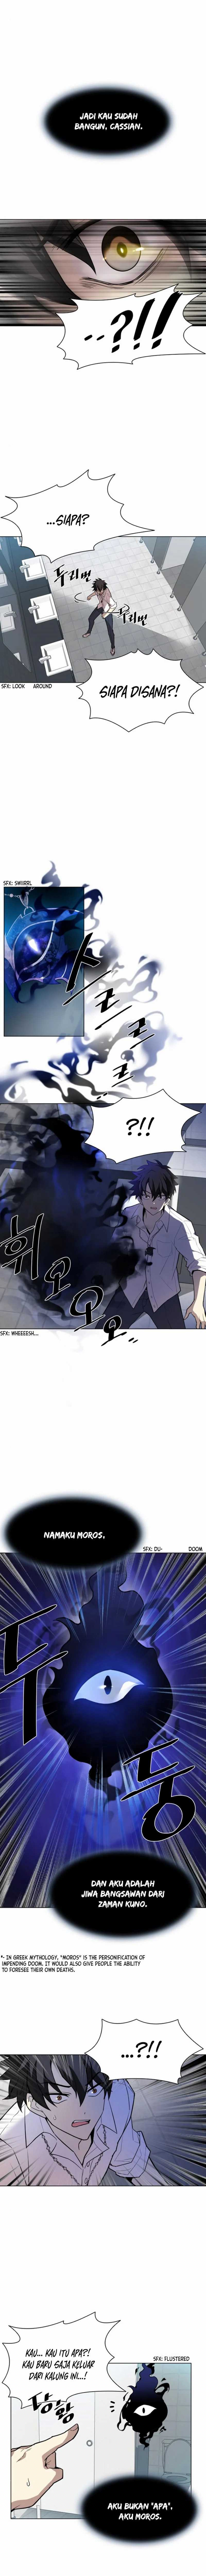 kill-to-villain Chapter chapter-02